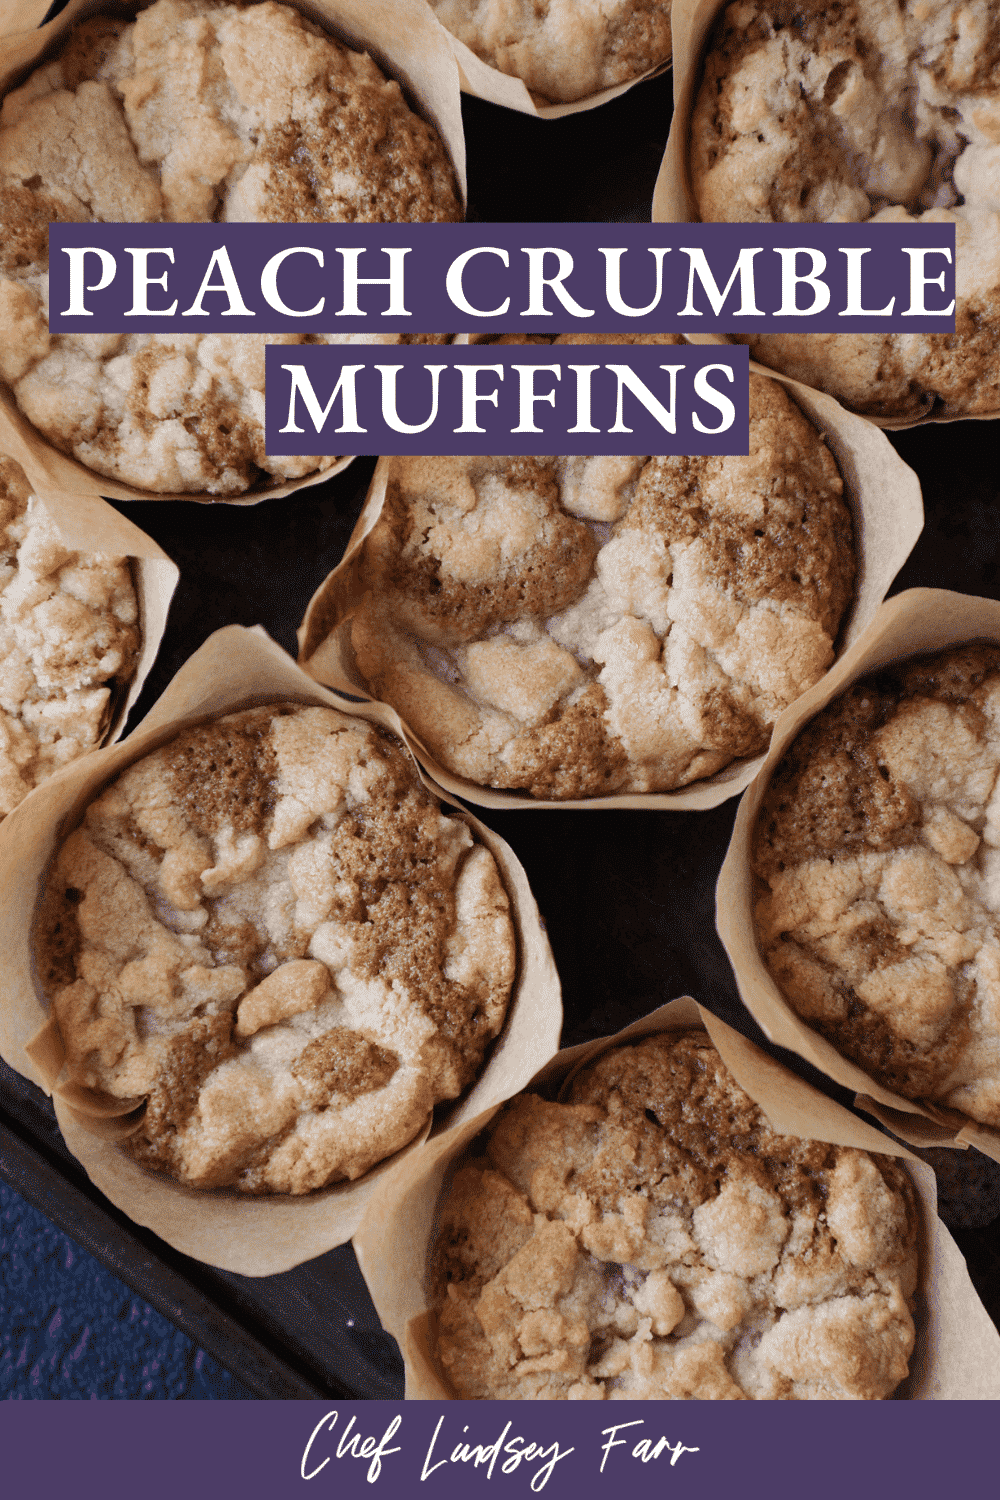 Peach Streusel Muffins Baked